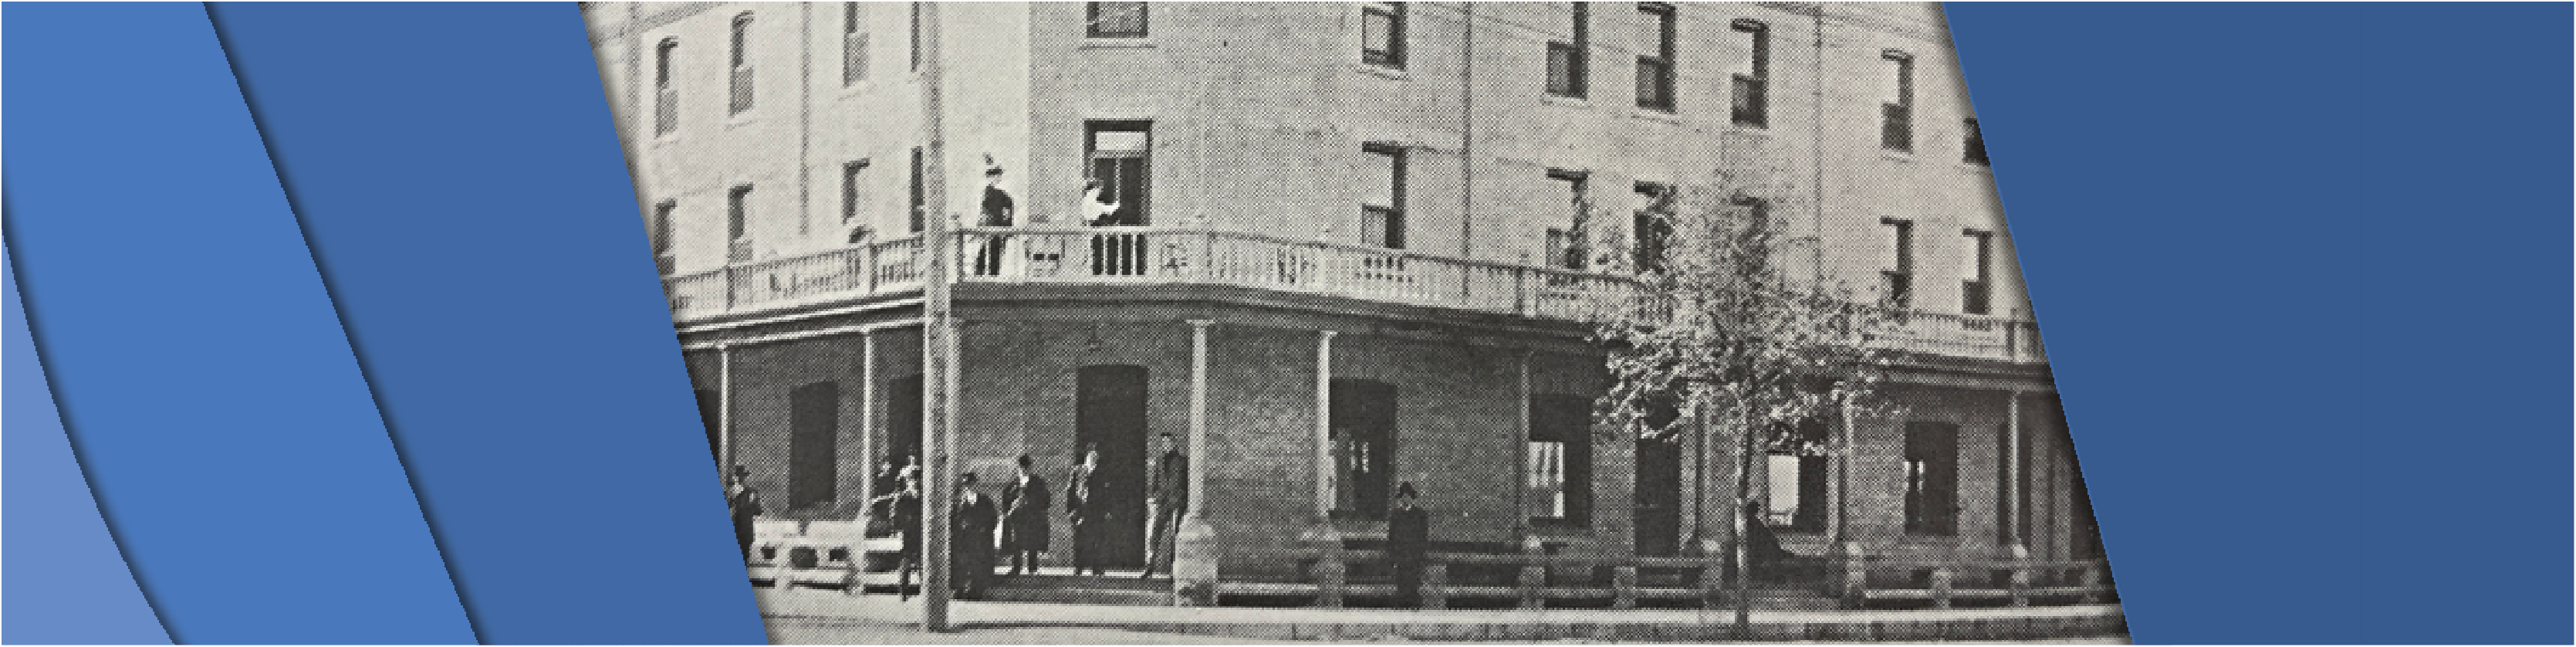 Photo that captures the front and sides of the Merchant's Hotel. This photo shows the buildings multiple levels.